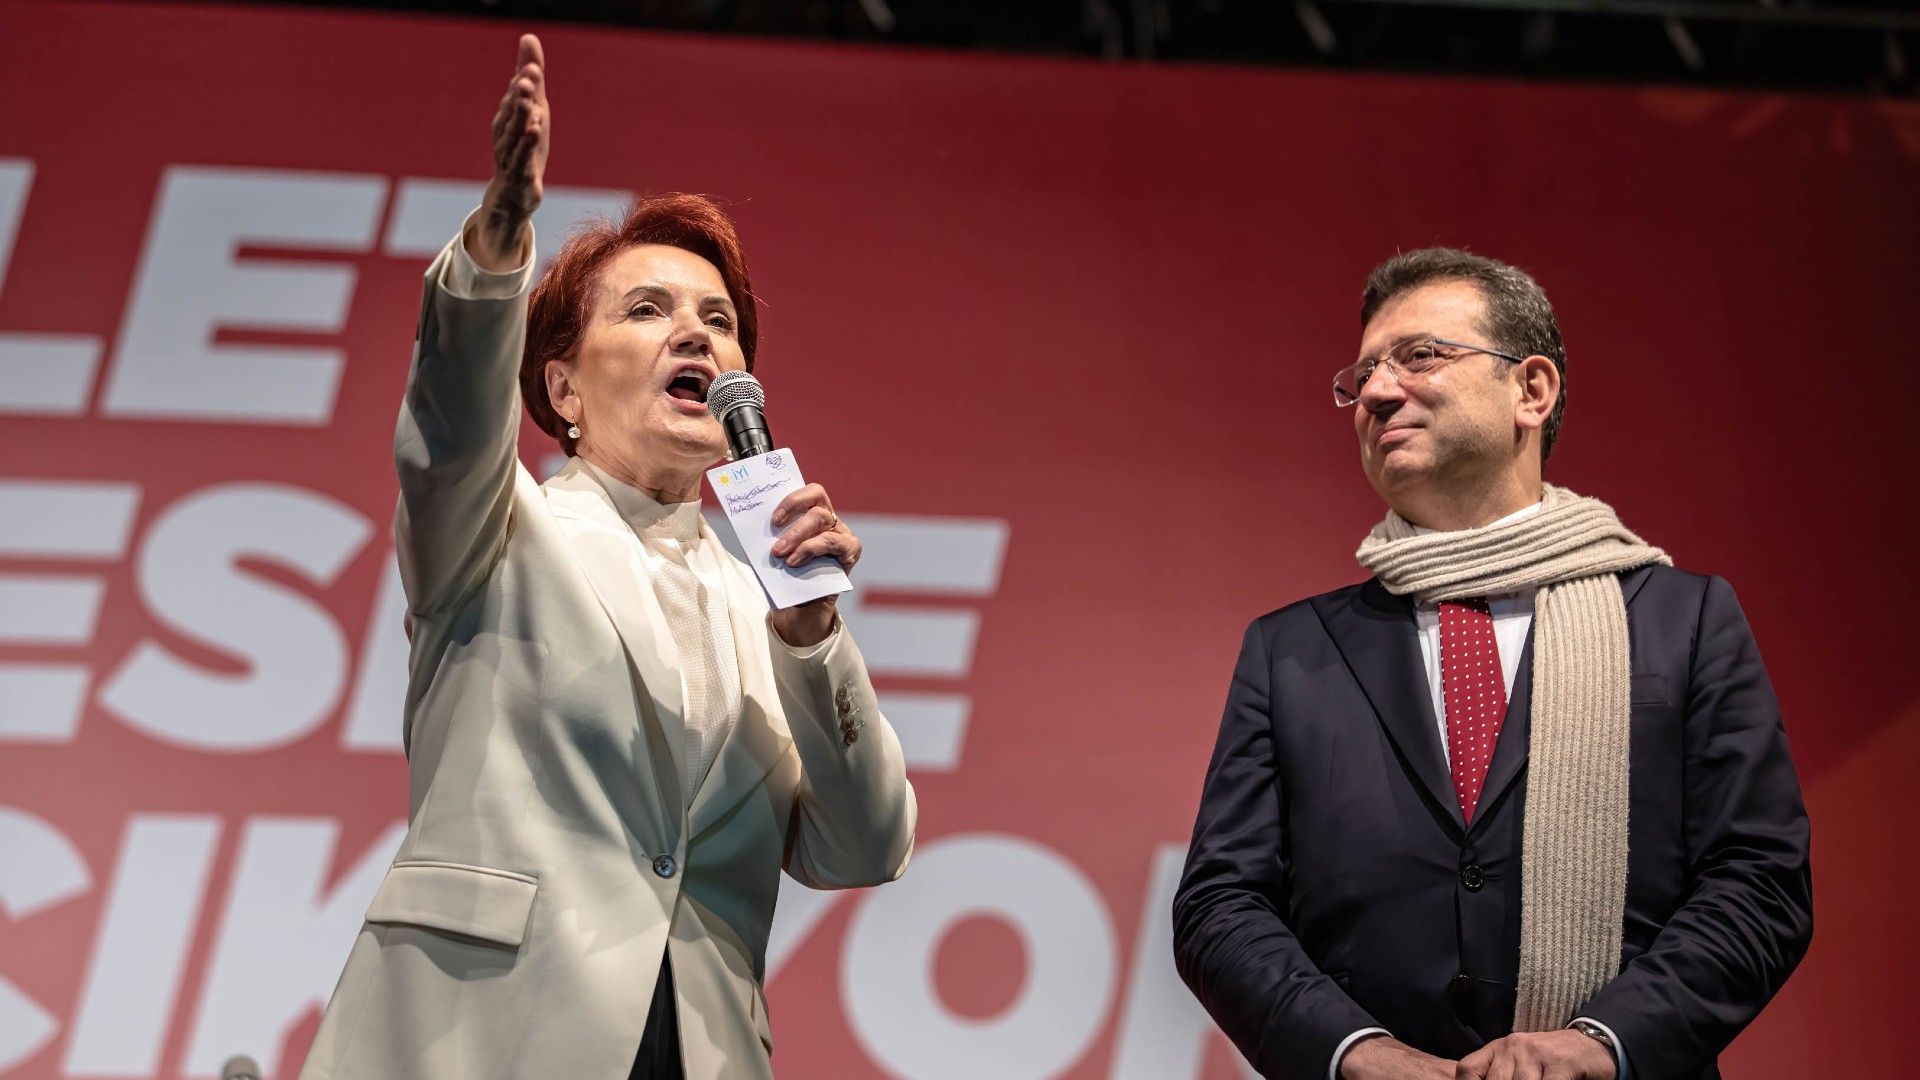 IYI Party Chairman Meral Aksener delivers a speech at a rally with Istanbul Mayor Ekrem Imamoglu in December 2022 (Reuters)